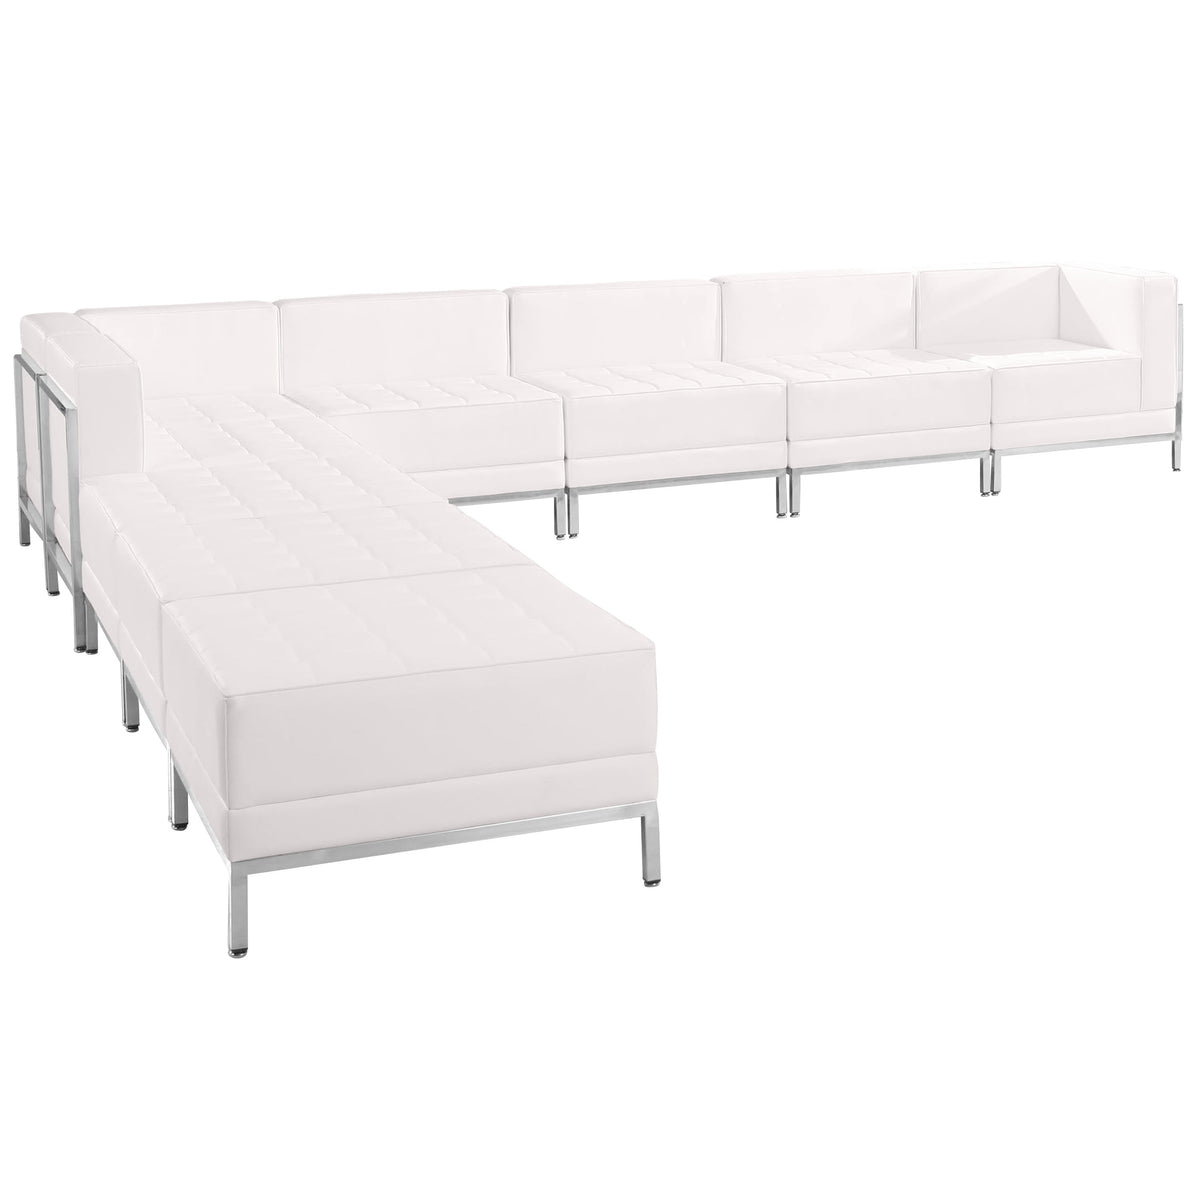 Melrose White |#| 9 Piece White LeatherSoft Modular Sectional Configuration - Stainless Steel Legs